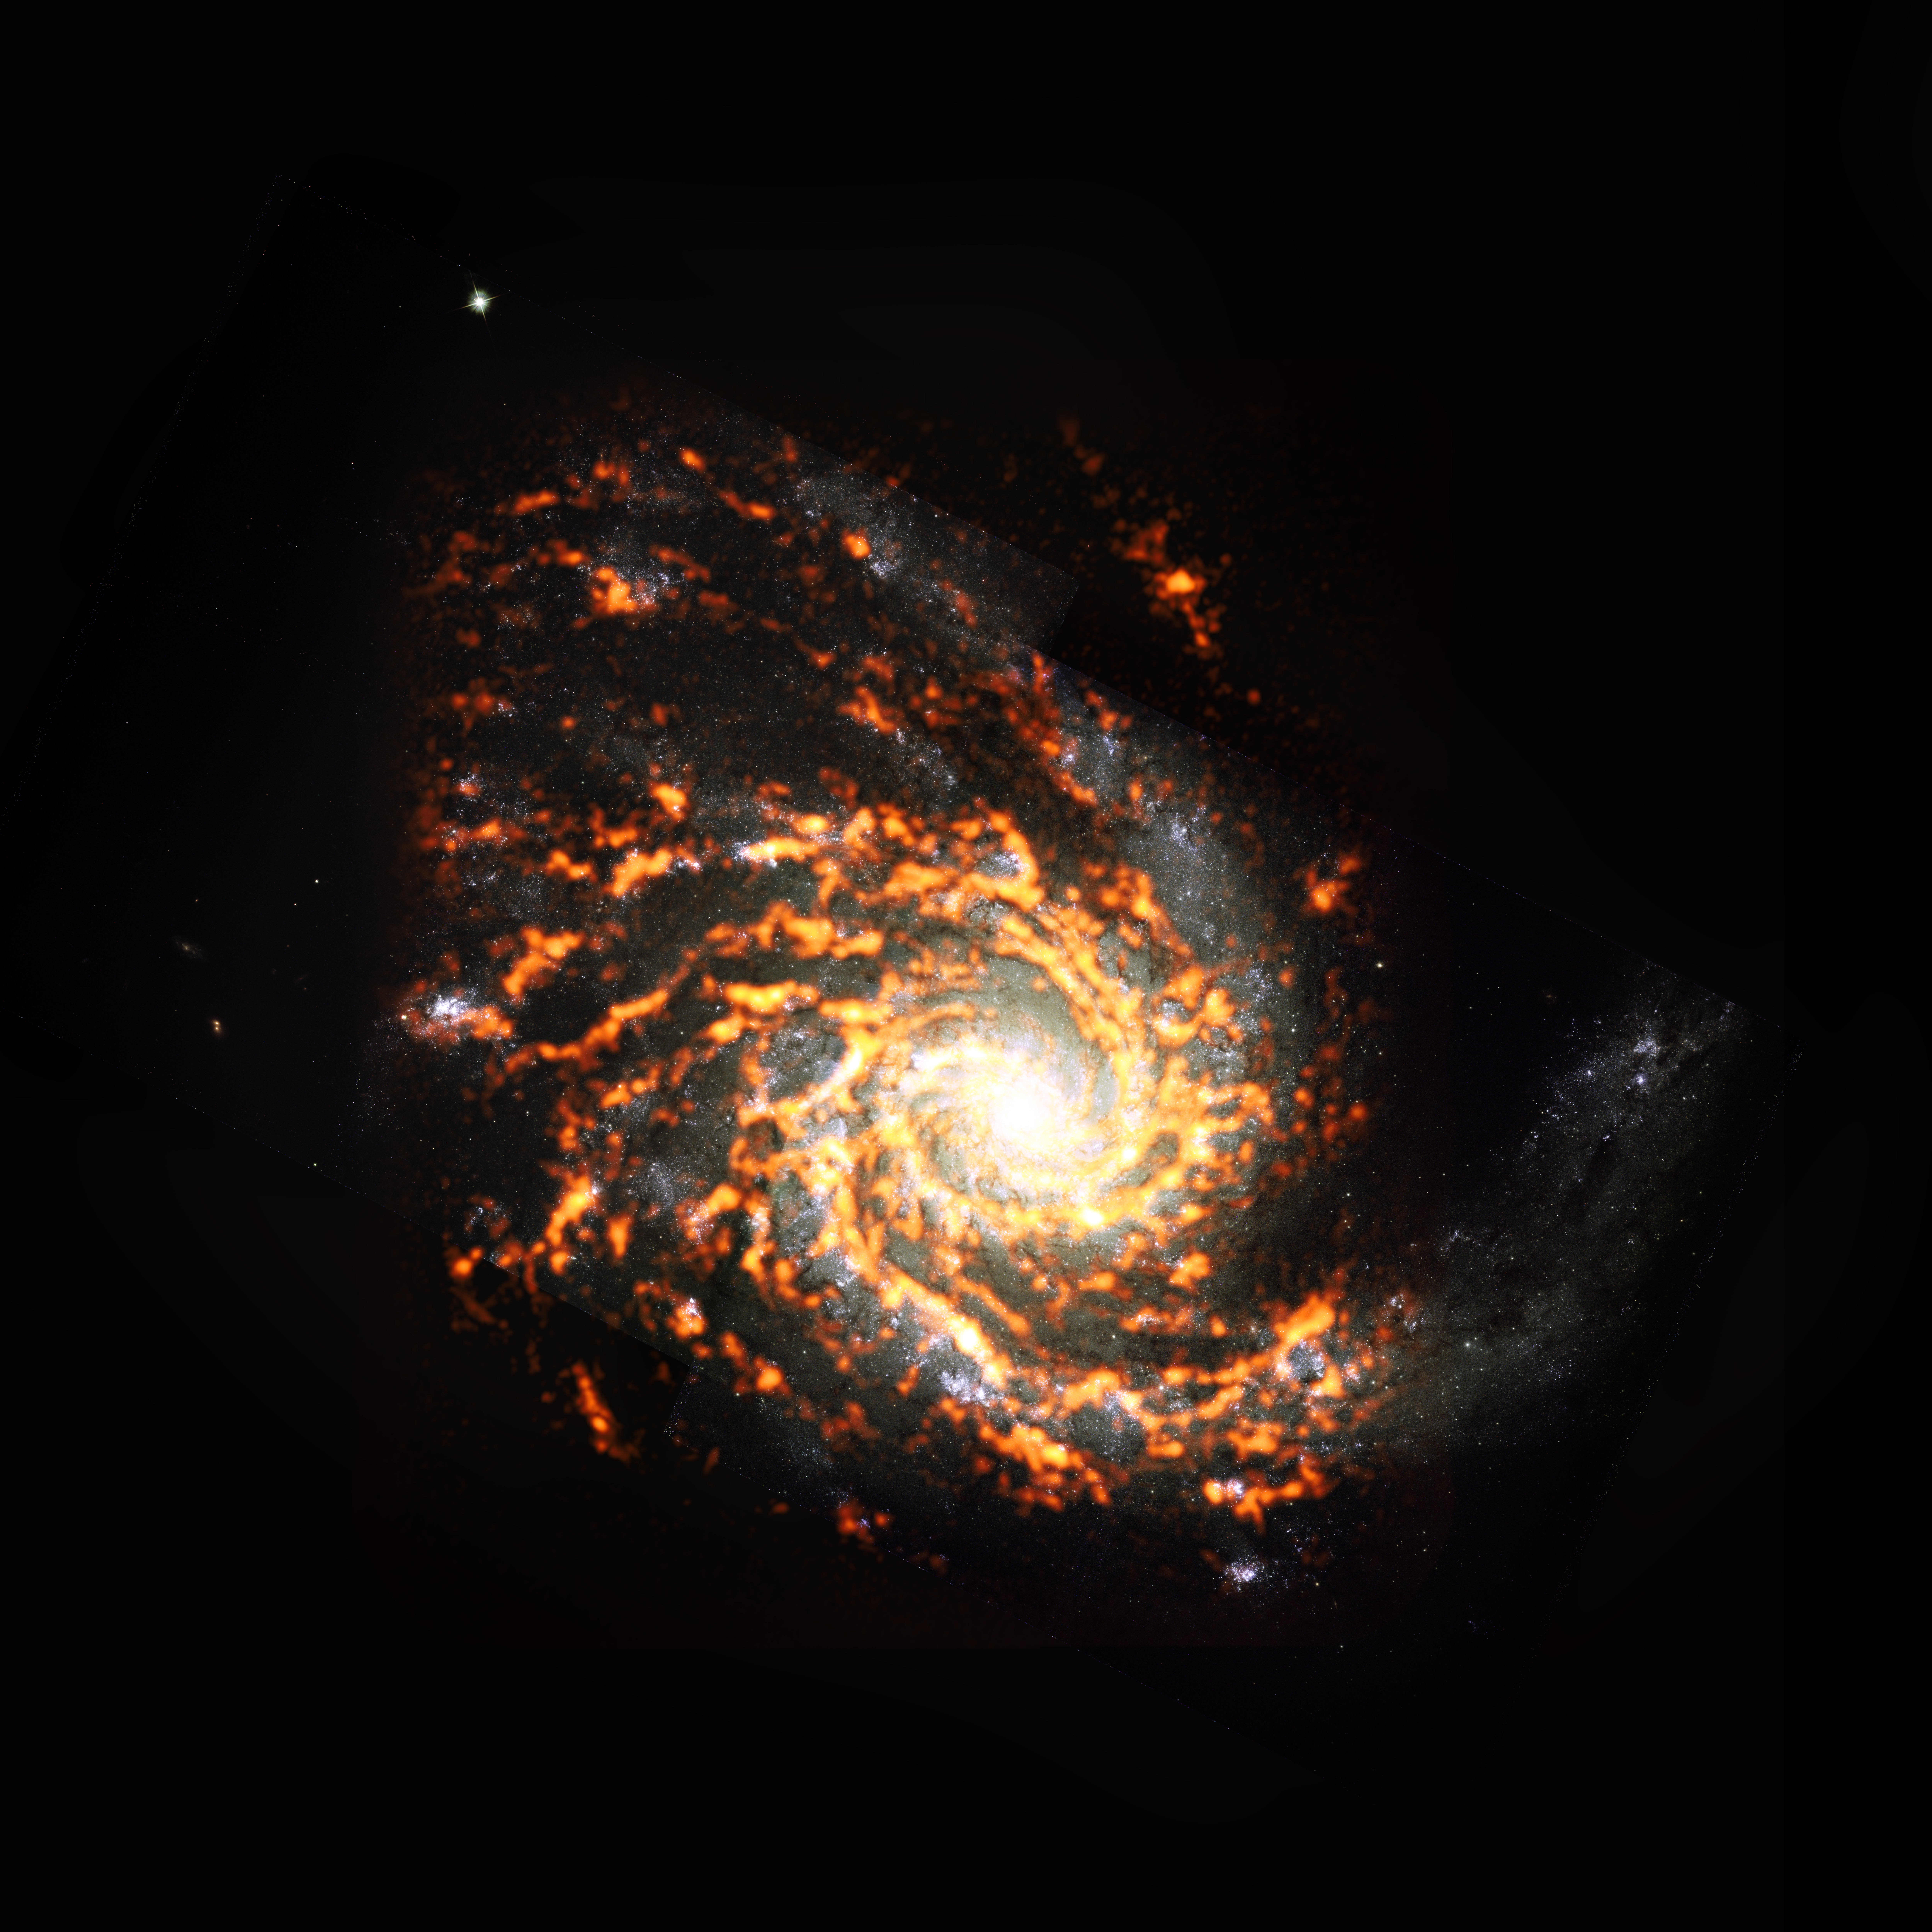 Composite image of NGC 4254, an M type galaxy with a spiral showing at least 8 arms in white, red, an orange.